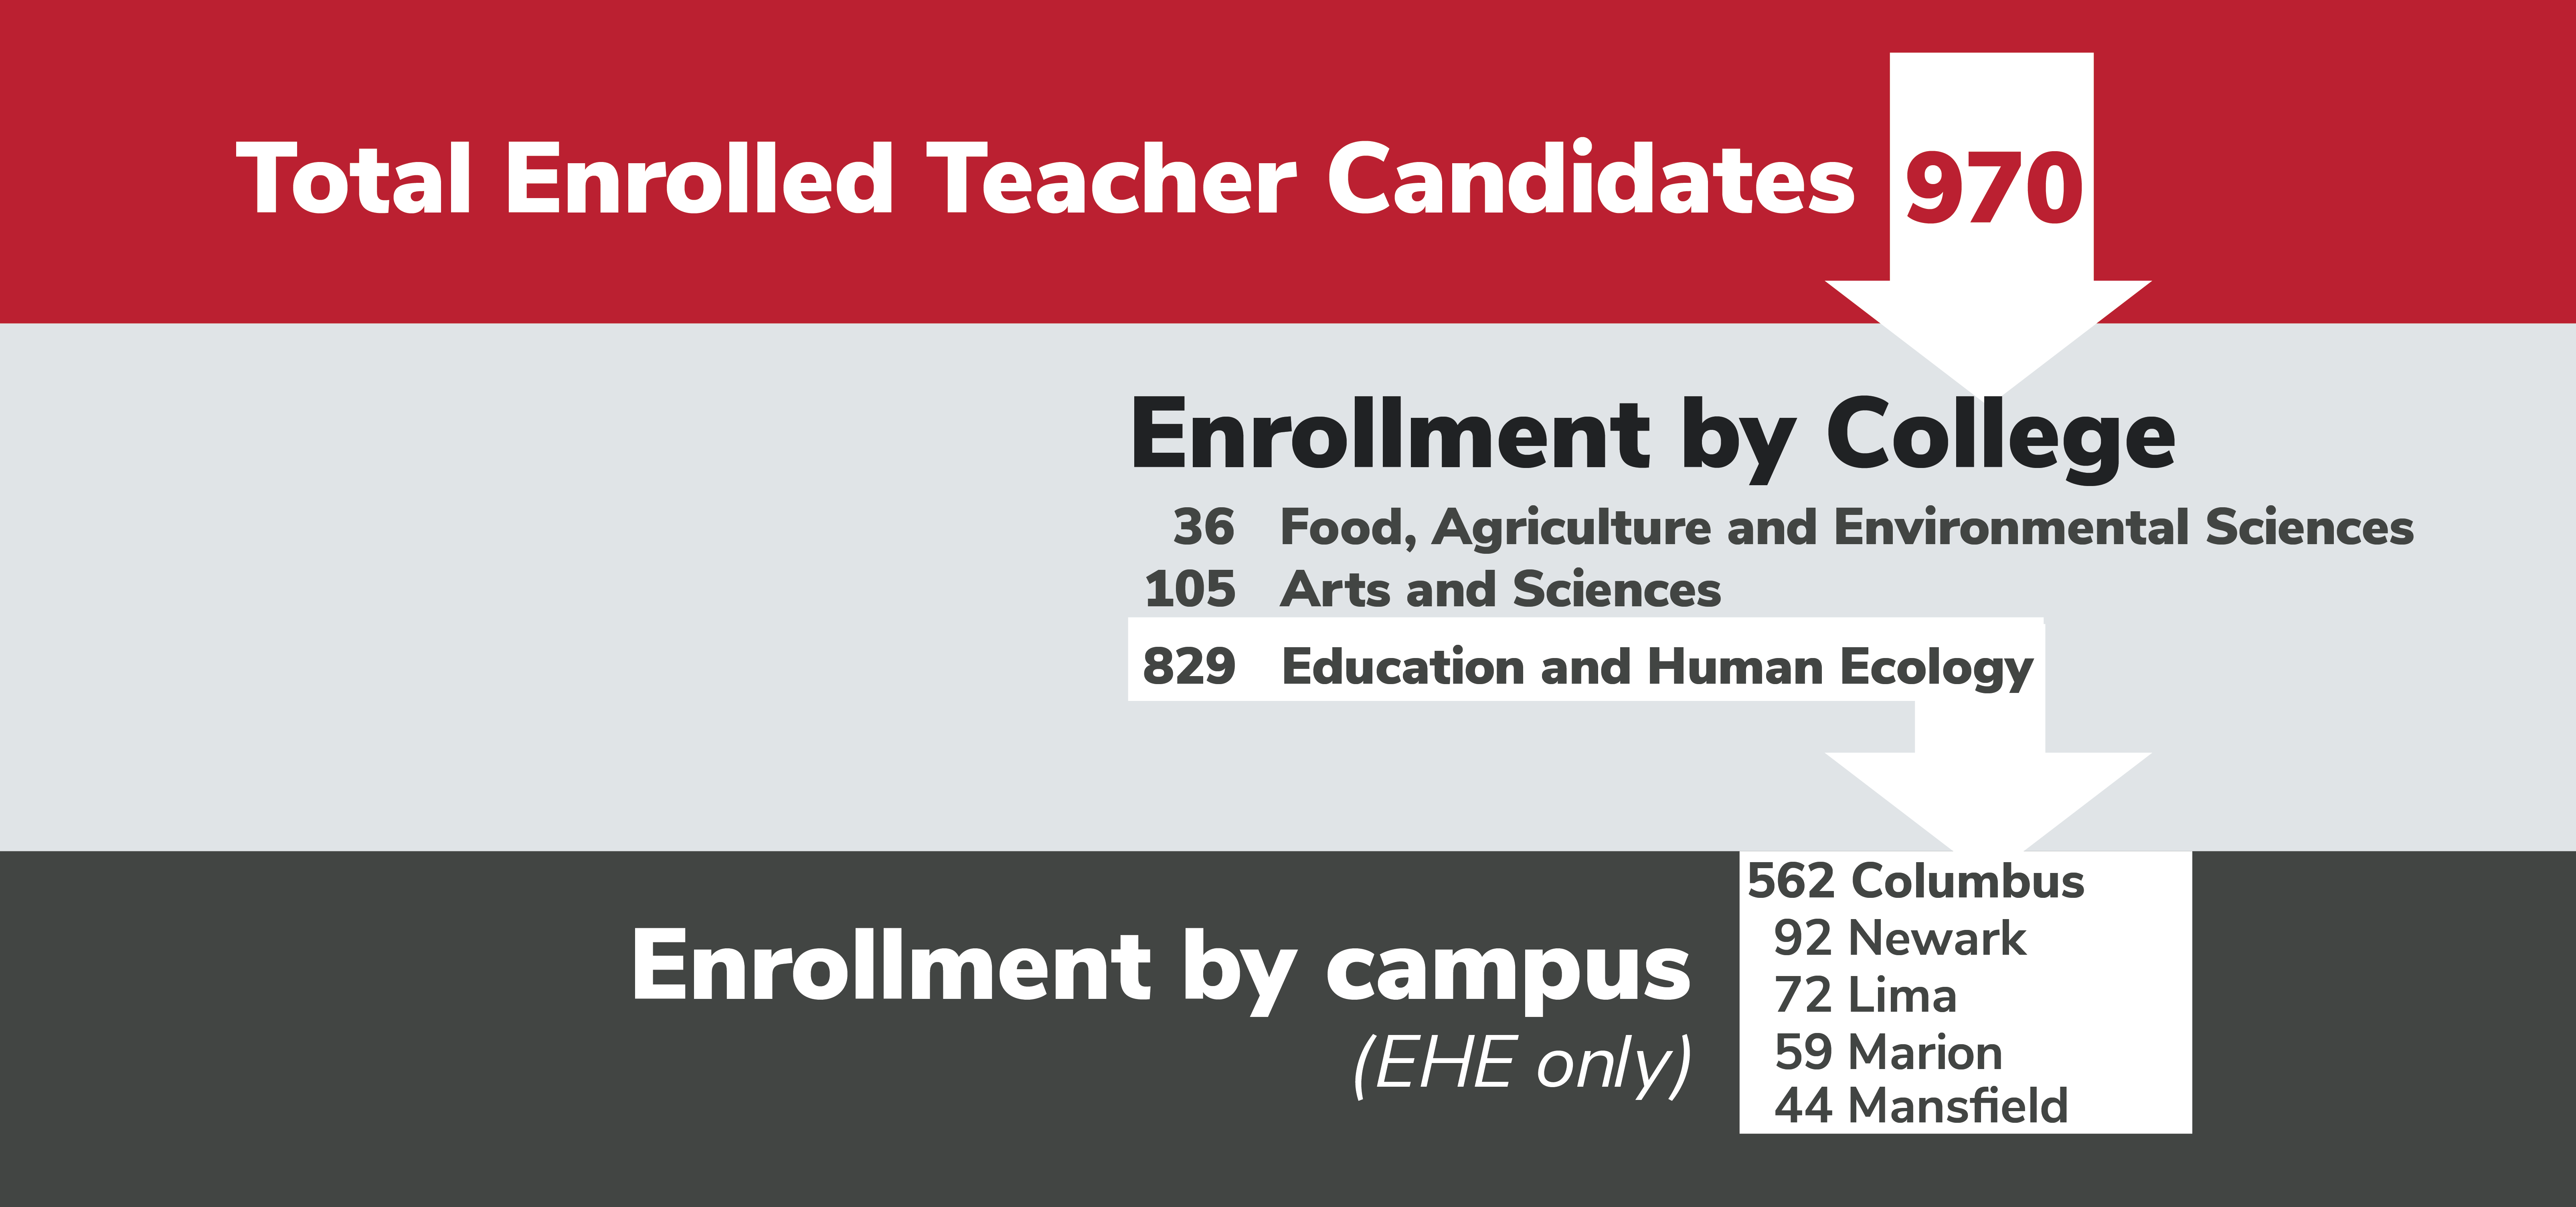 970 total enrolled teacher candidates broken down by colleges; 36 Food agriculture and environmental sciences, 105 Arts and Sciences, 829 Education and Human Ecology. Of the 829, the graphic breaks down enrollment by campus; 92 Newark, 72 Lima, 562 Columbus, 44 Mansfield and 59 for Marion